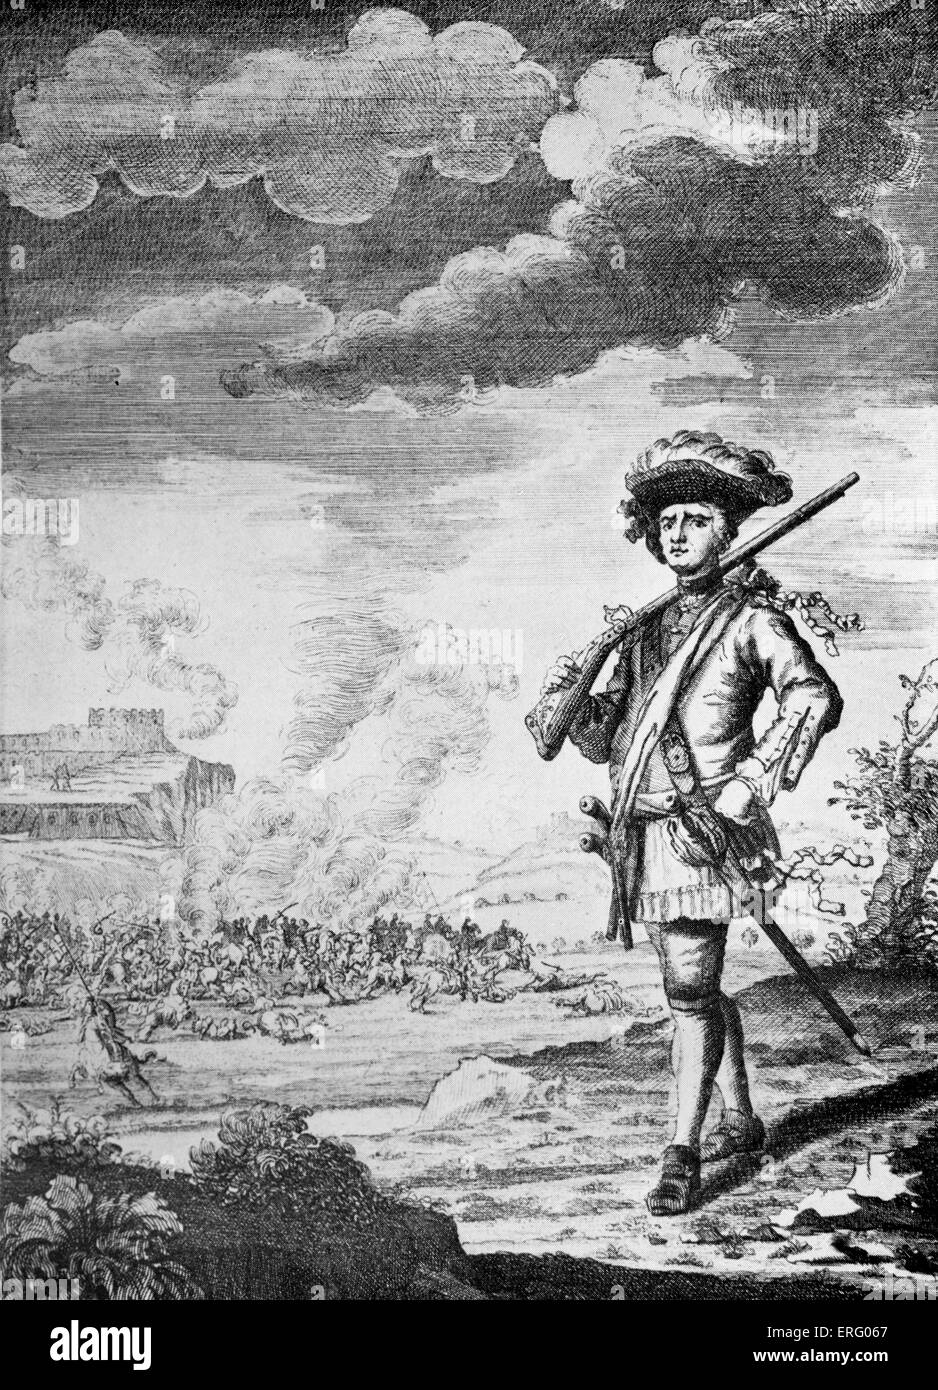 'Sir Henry Morgan, the Buccaneer, before Panama', engraving. The city of Panama, that Sir Henry Morgan invaded sacked and burned in 1671, is attacked in the background. HM: Welsh buccaneer, born c. 1635 - 1688. Stock Photo